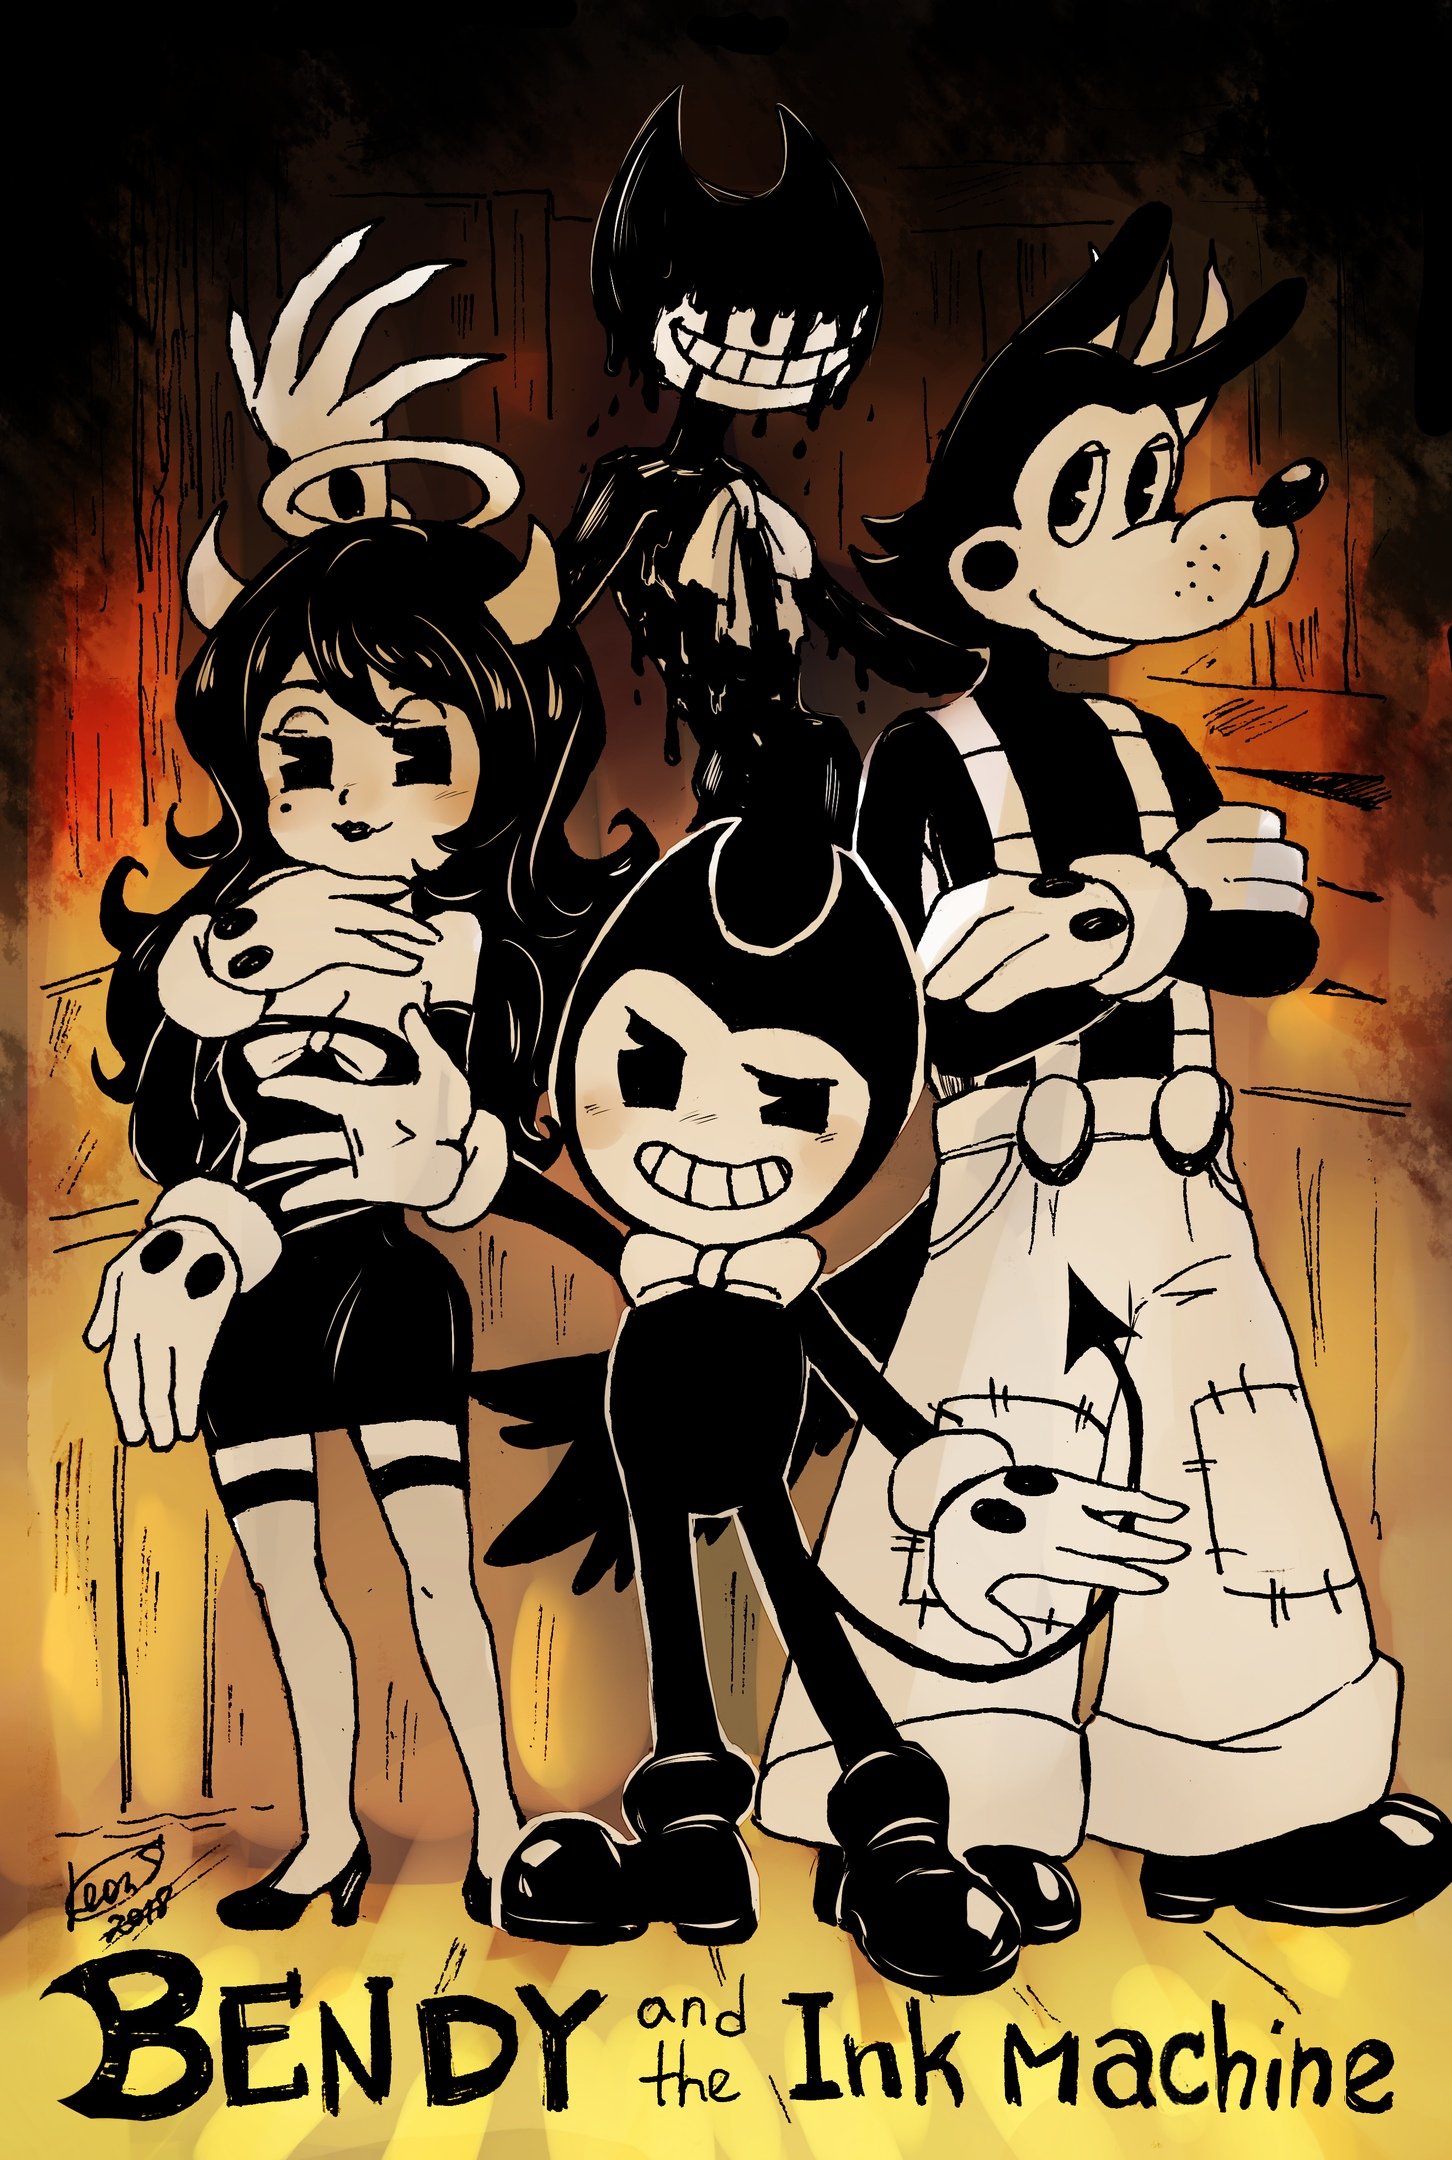 Bendy And The Ink Machine Community - Fan art, videos, guides